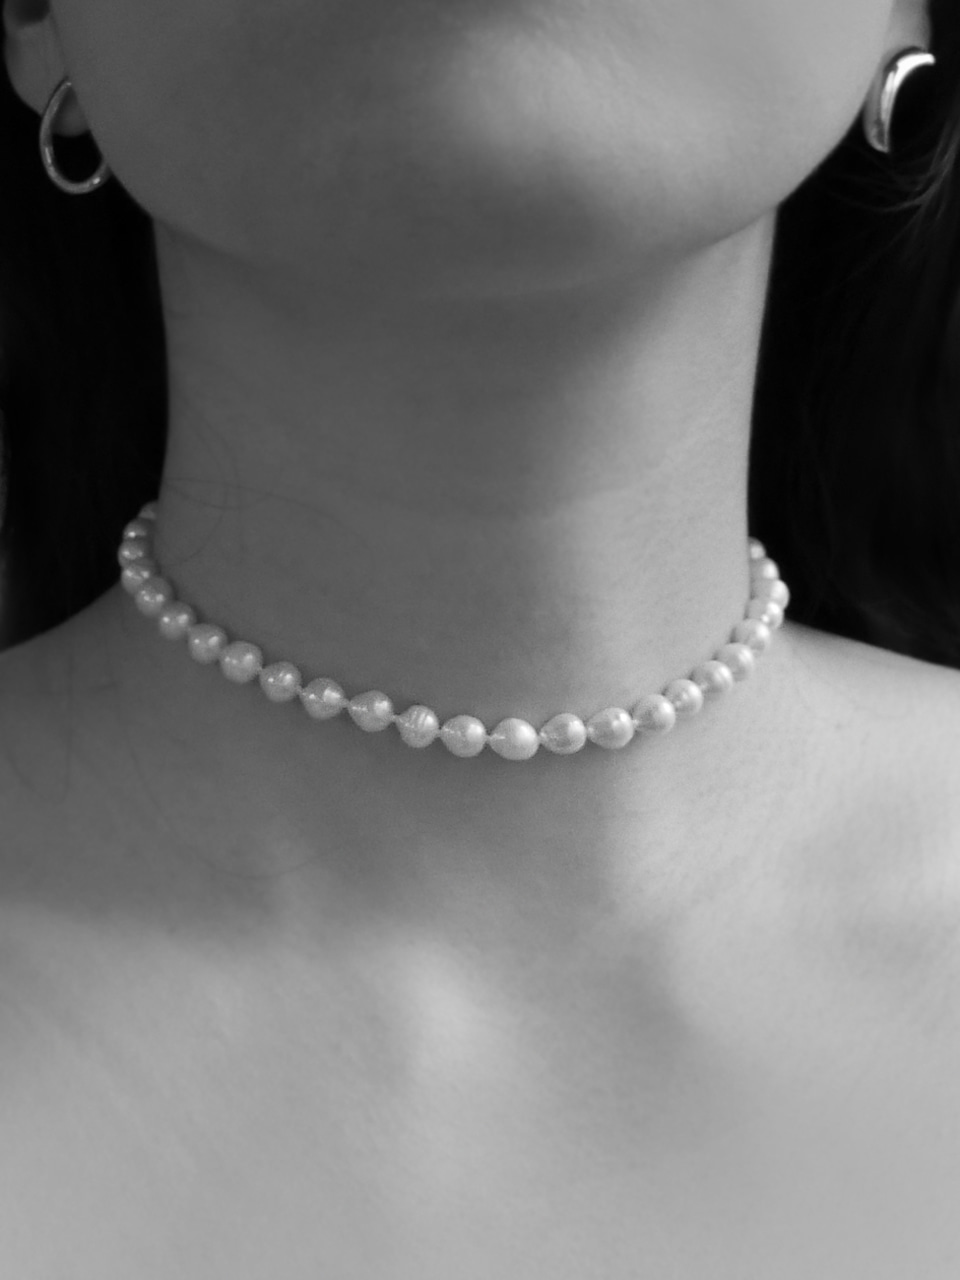 Pearls choker necklace 진주 초커목걸이